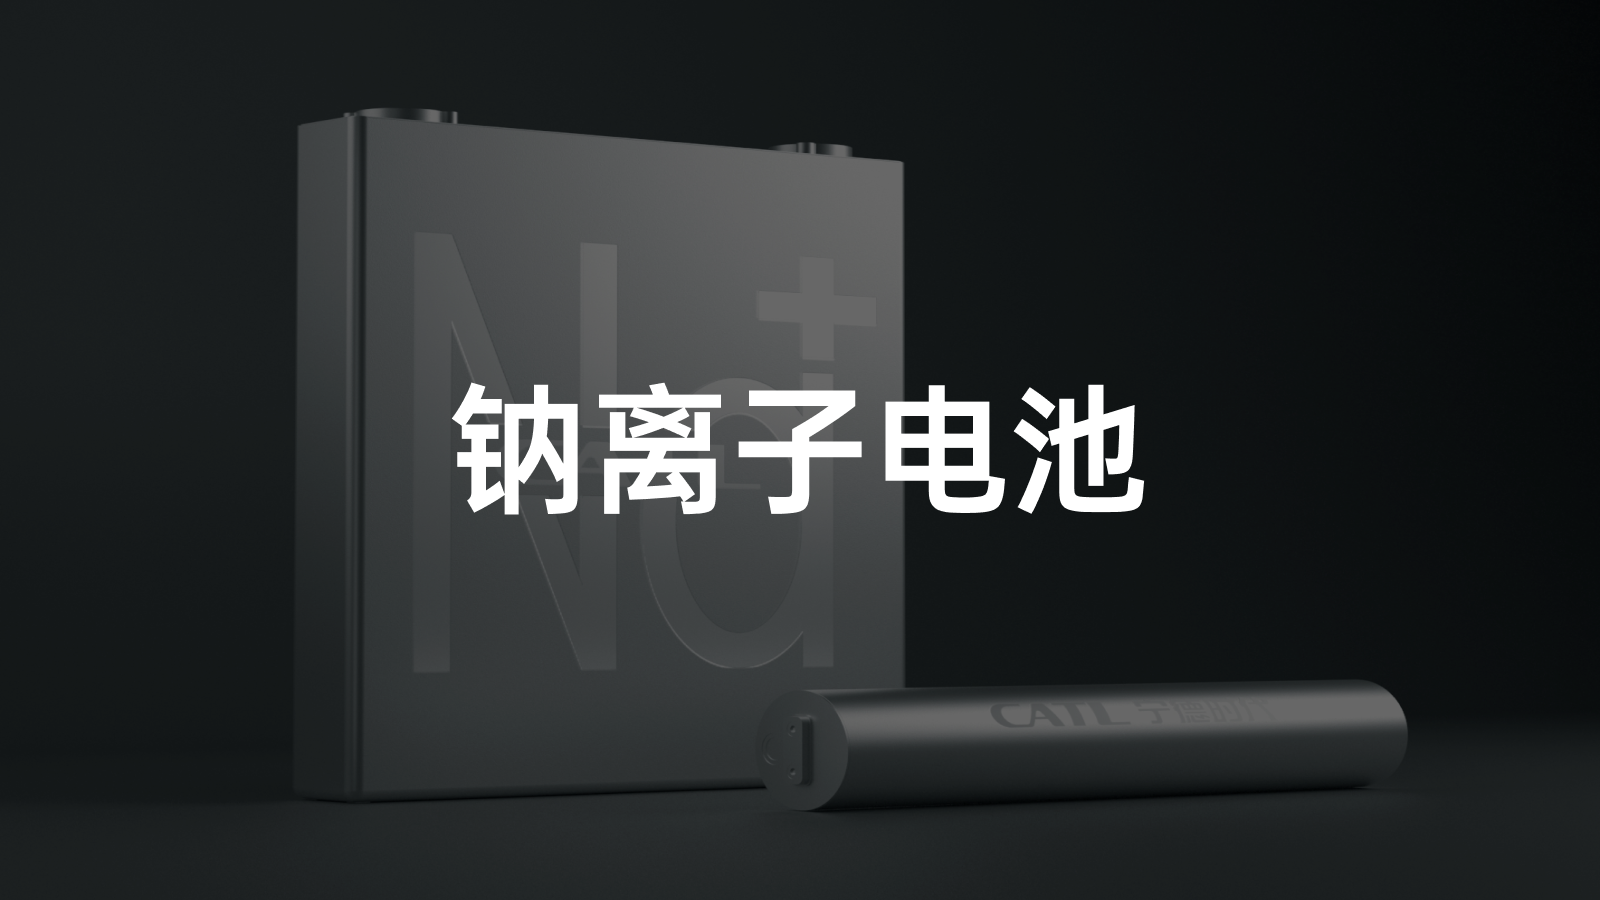 Why does CATL (Contemporary Amperex Technology Co. Ltd) want to develop sodium-ion batteries after reaching a trillion-yuan market value?